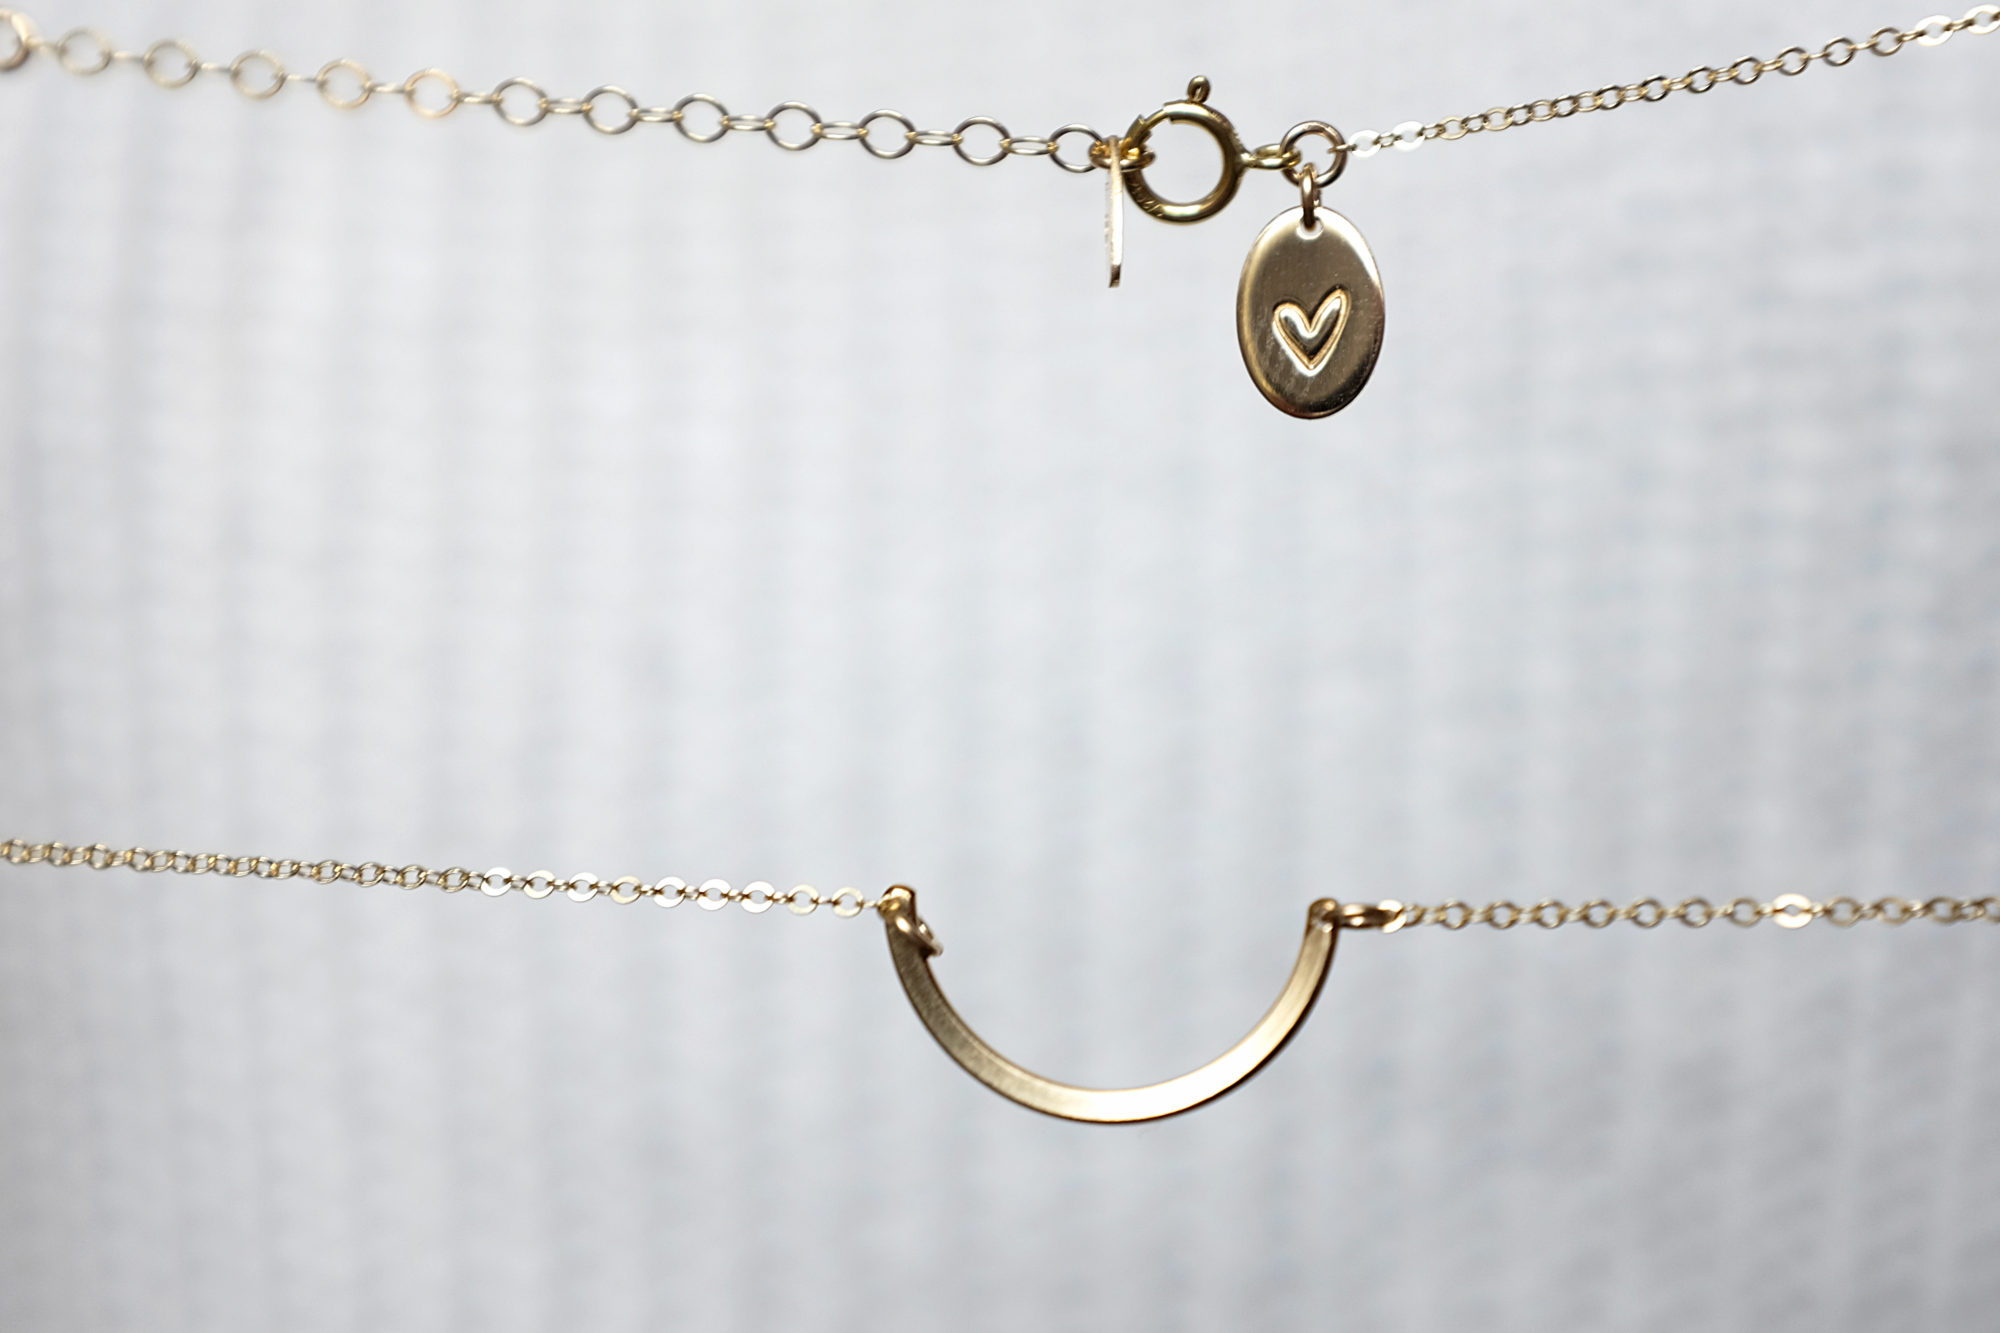 One half-circle necklace with a heart oval at the clasp